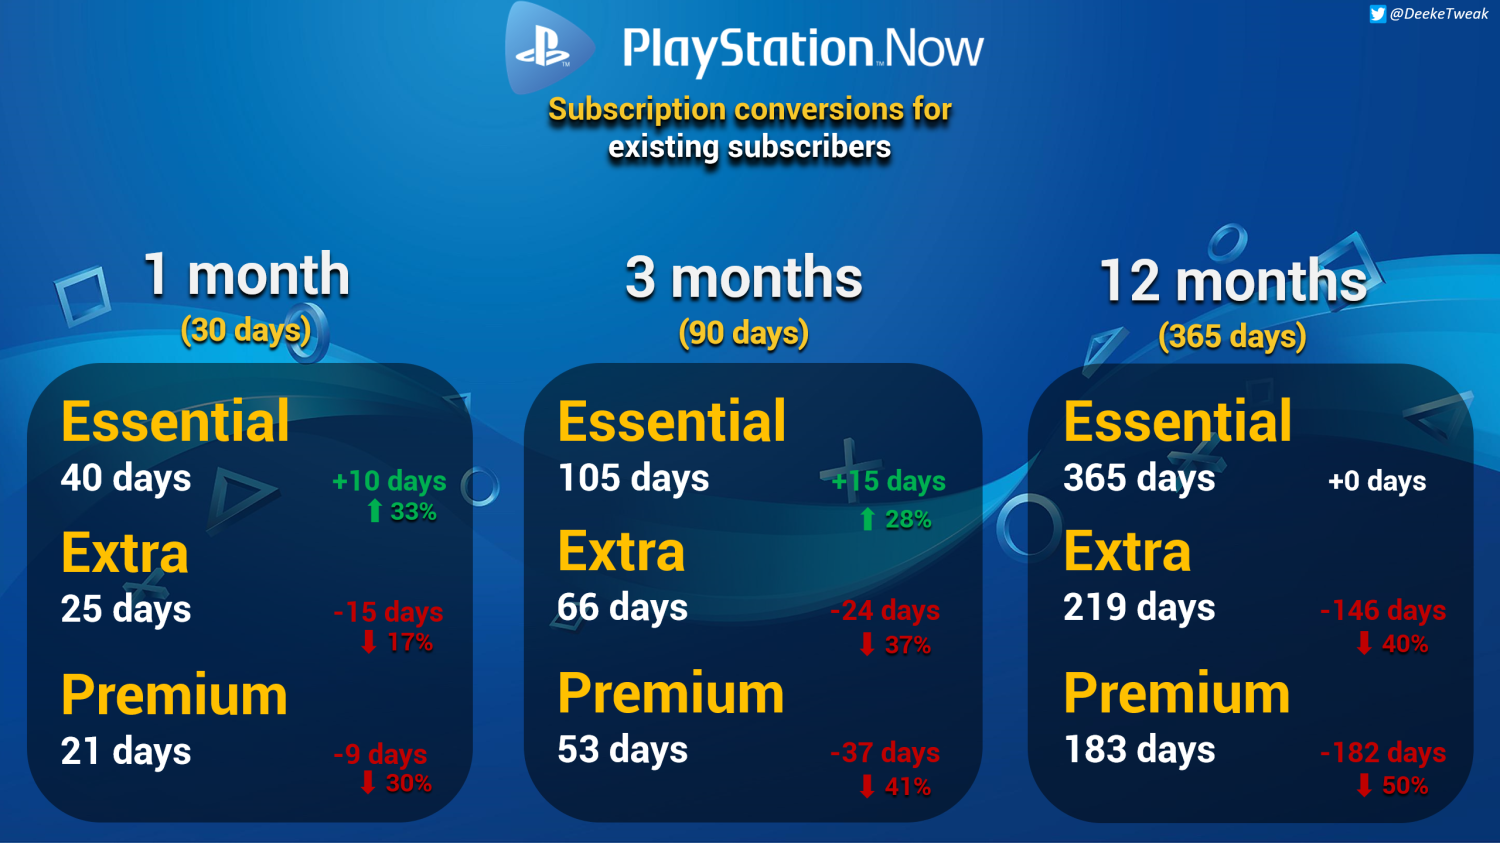 PlayStation Plus pro-rated upgrade fees: Here's how much they cost